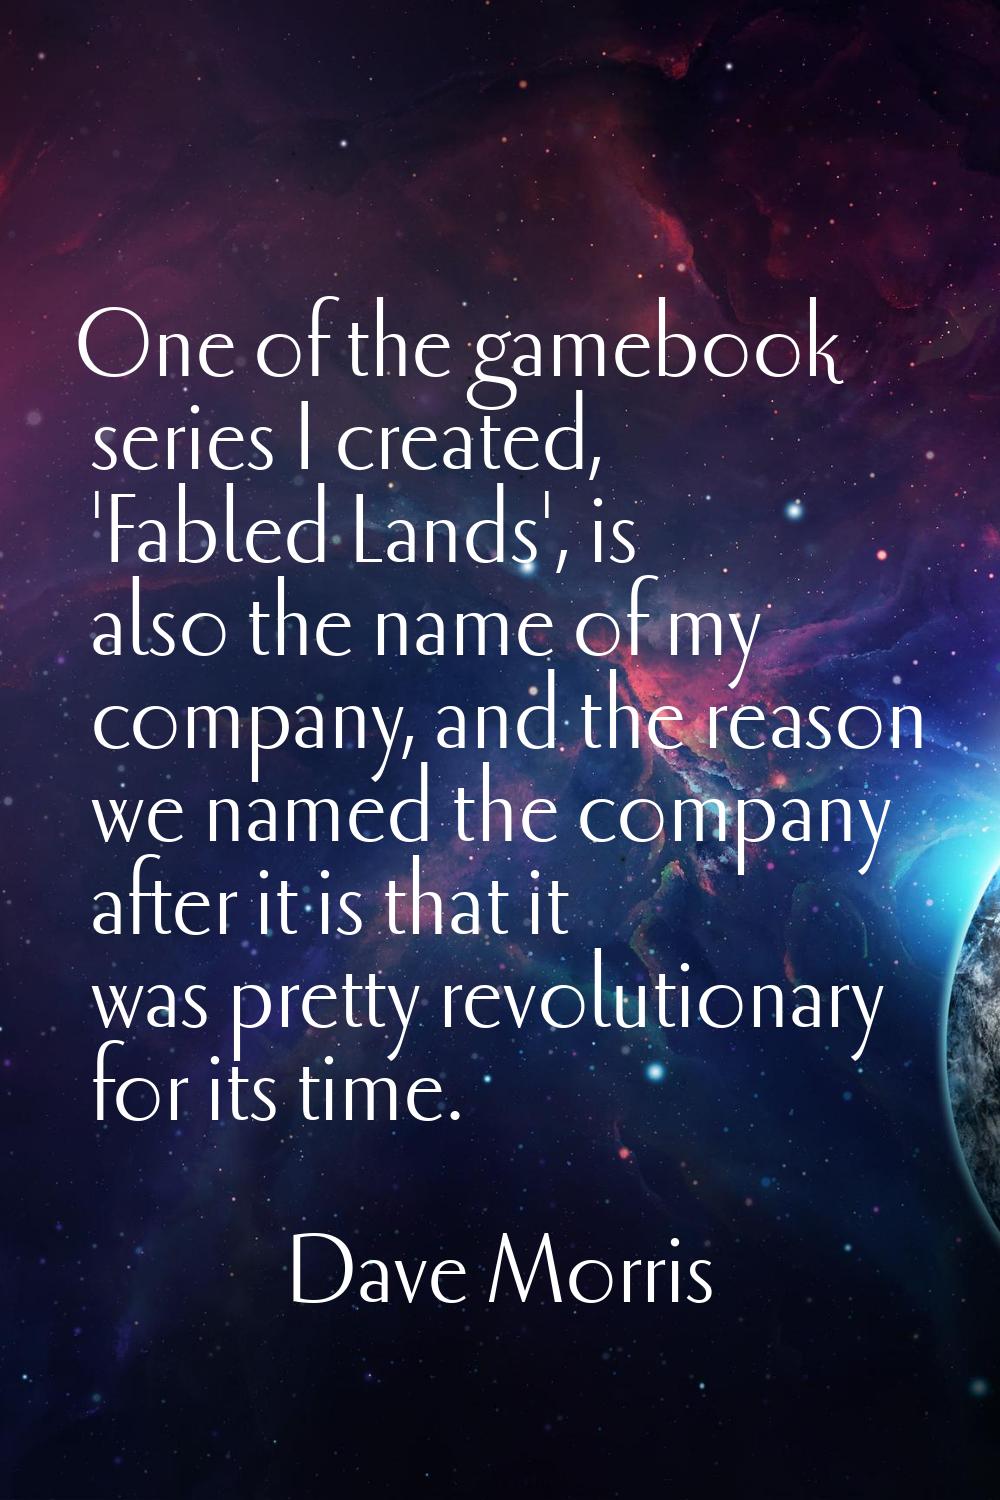 One of the gamebook series I created, 'Fabled Lands', is also the name of my company, and the reaso